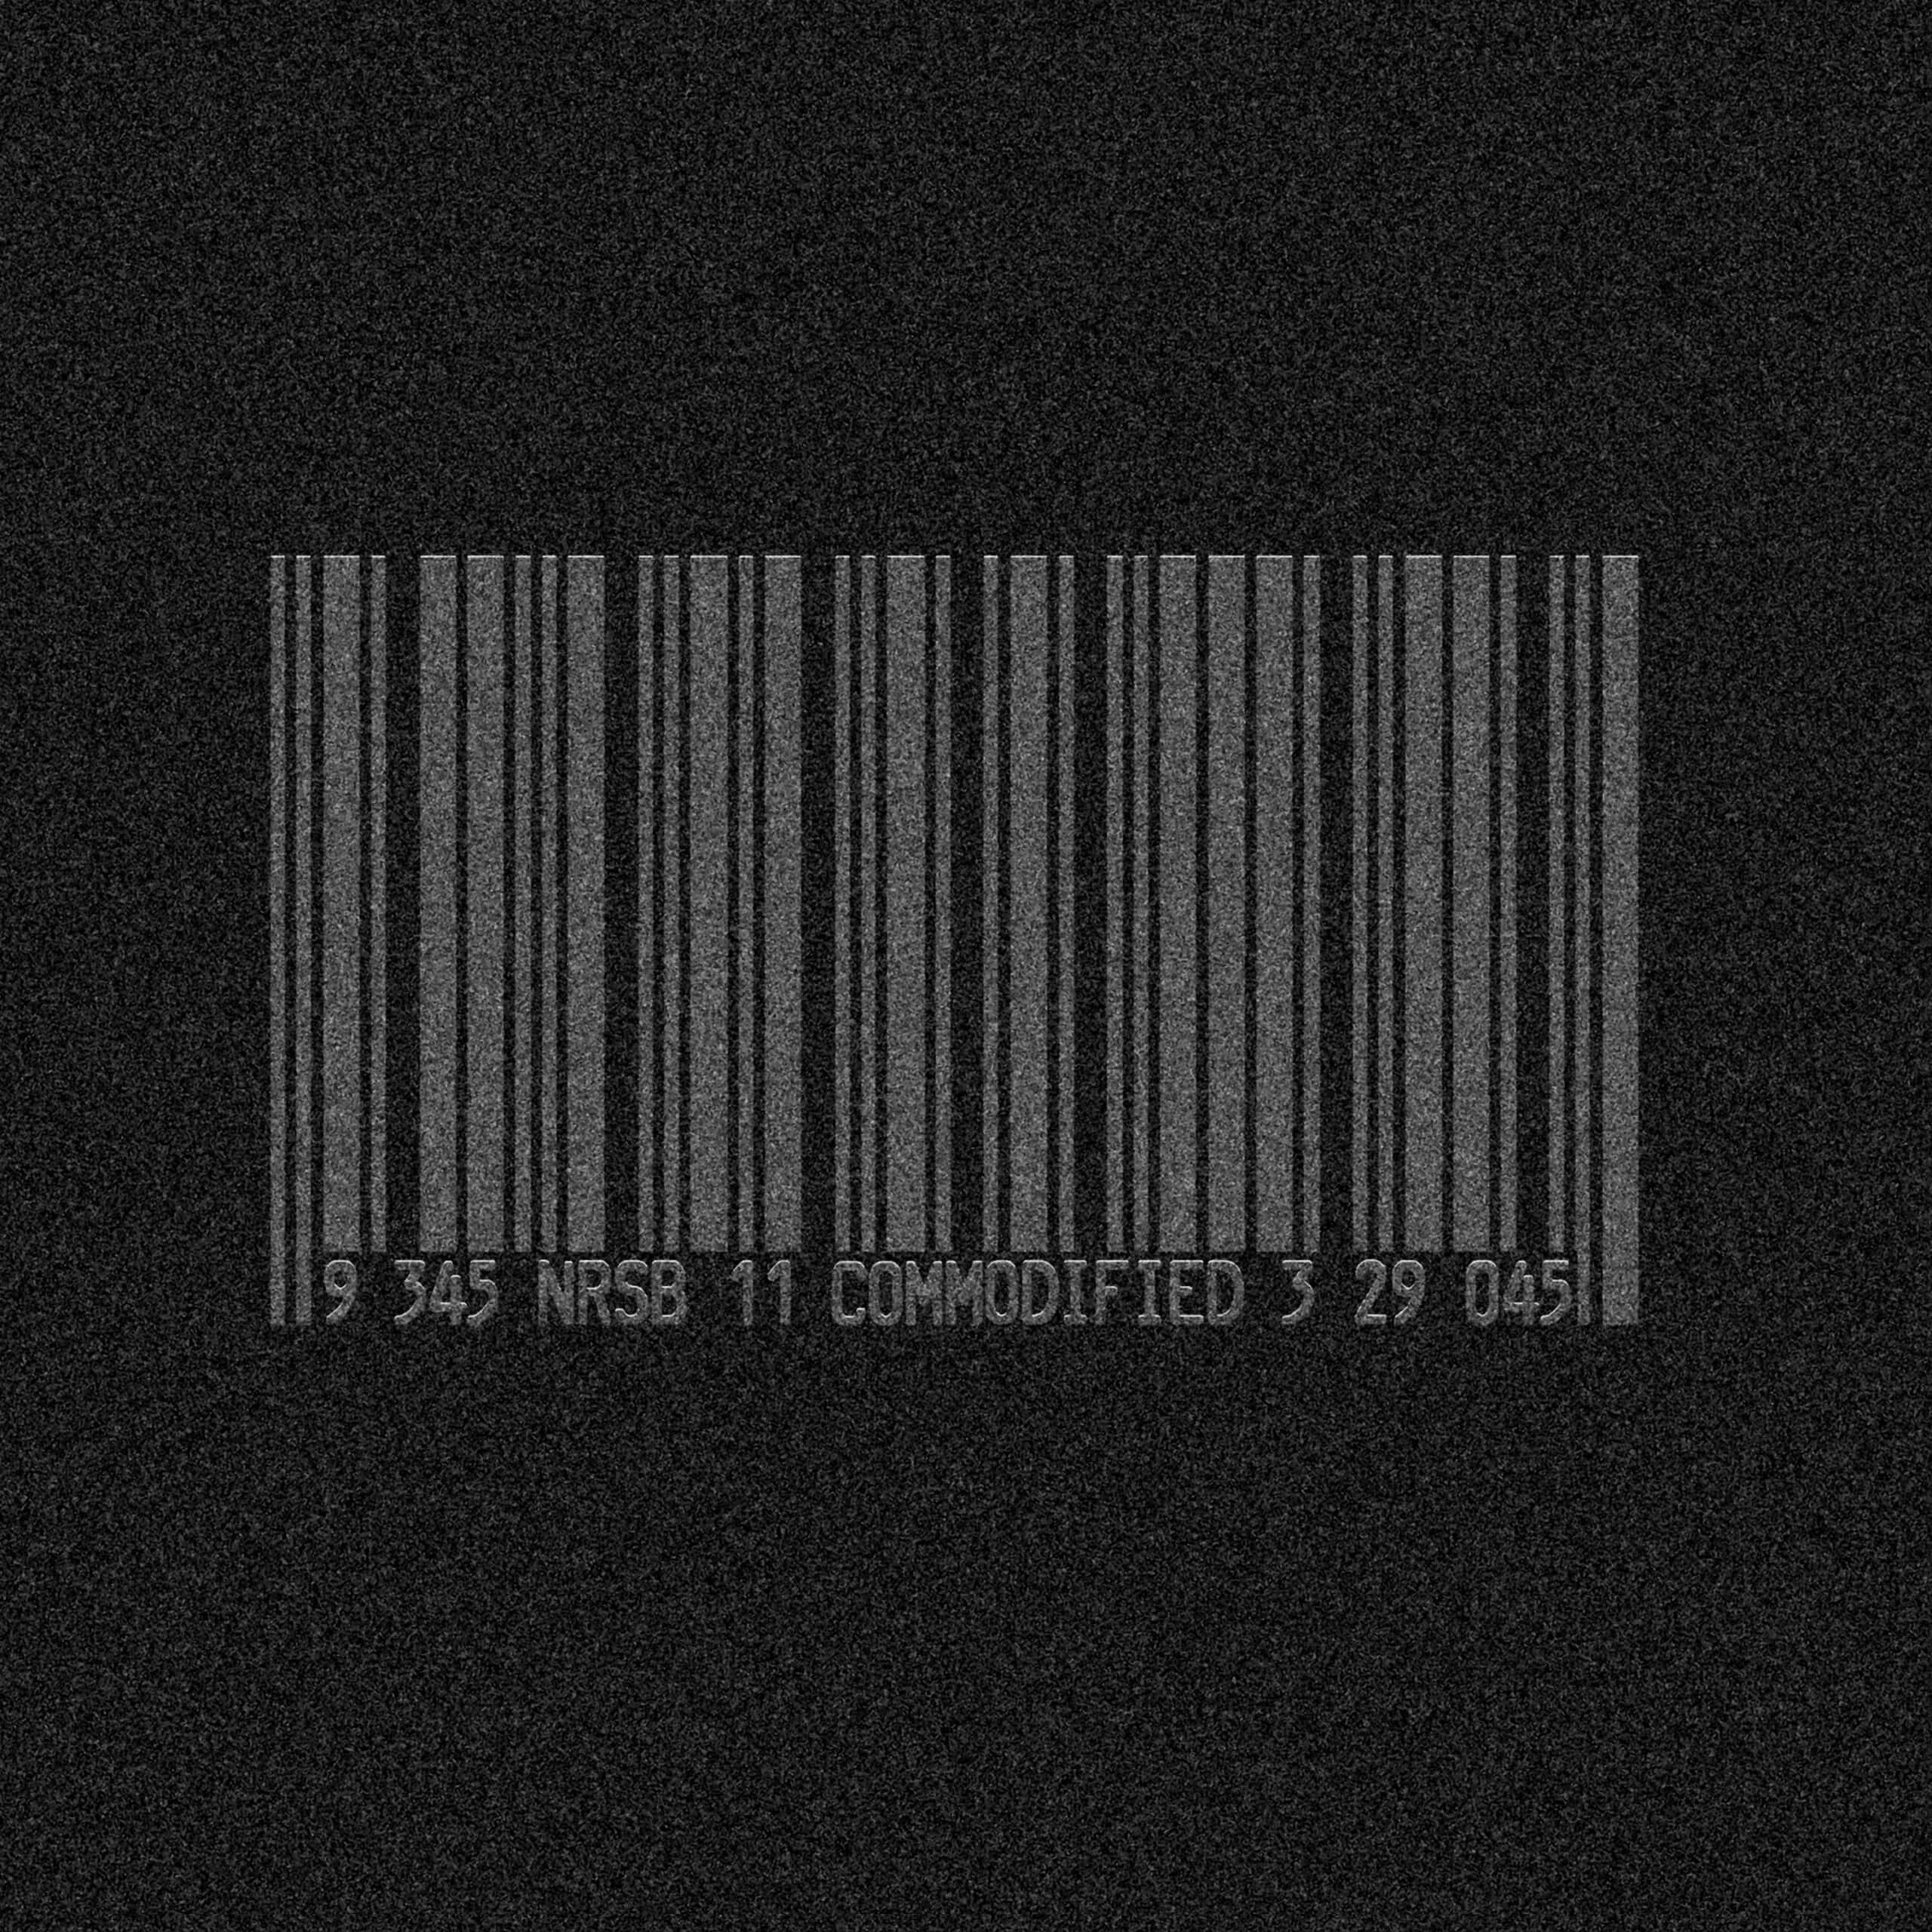 image cover: NRSB-11 - Commodified on Disciples